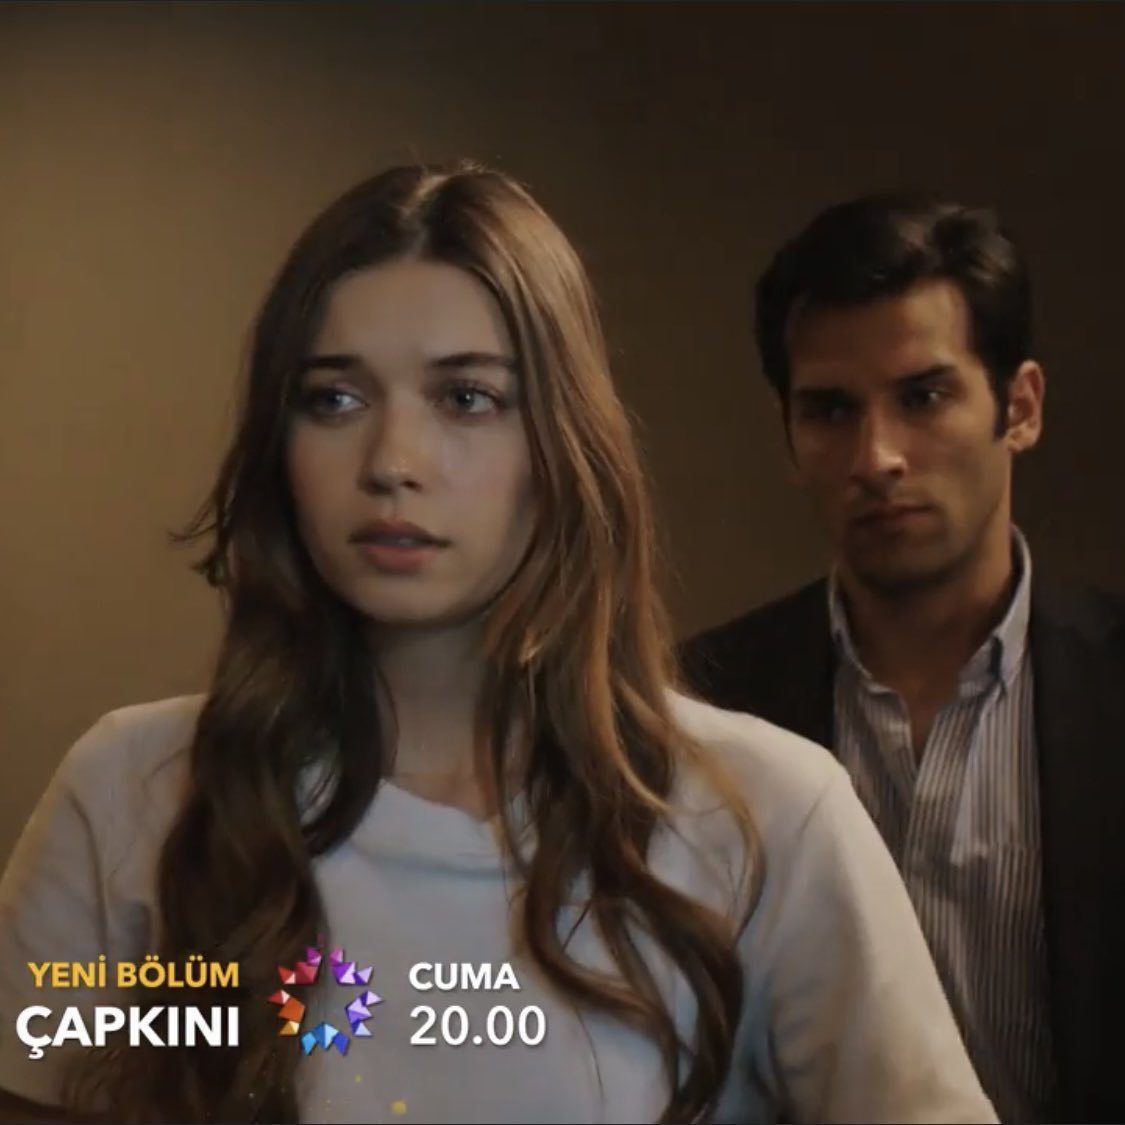 so kazim really did throw Seyran at Tarik’s door and he brought her back home.. #yalıçapkını what the hell am I watching here???